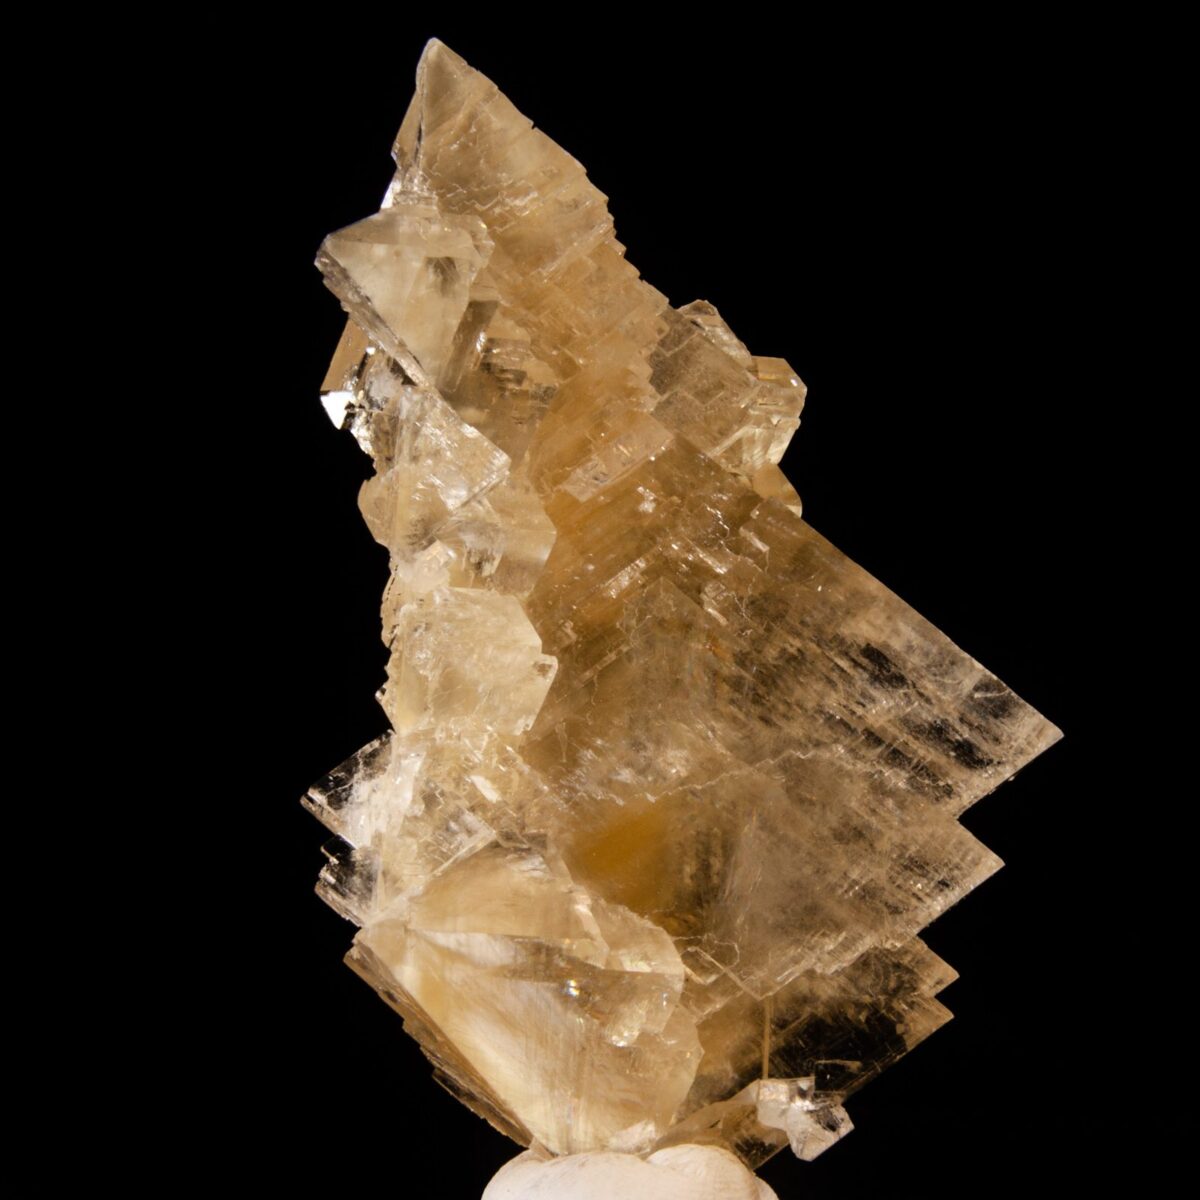 Calcite twinned crystals